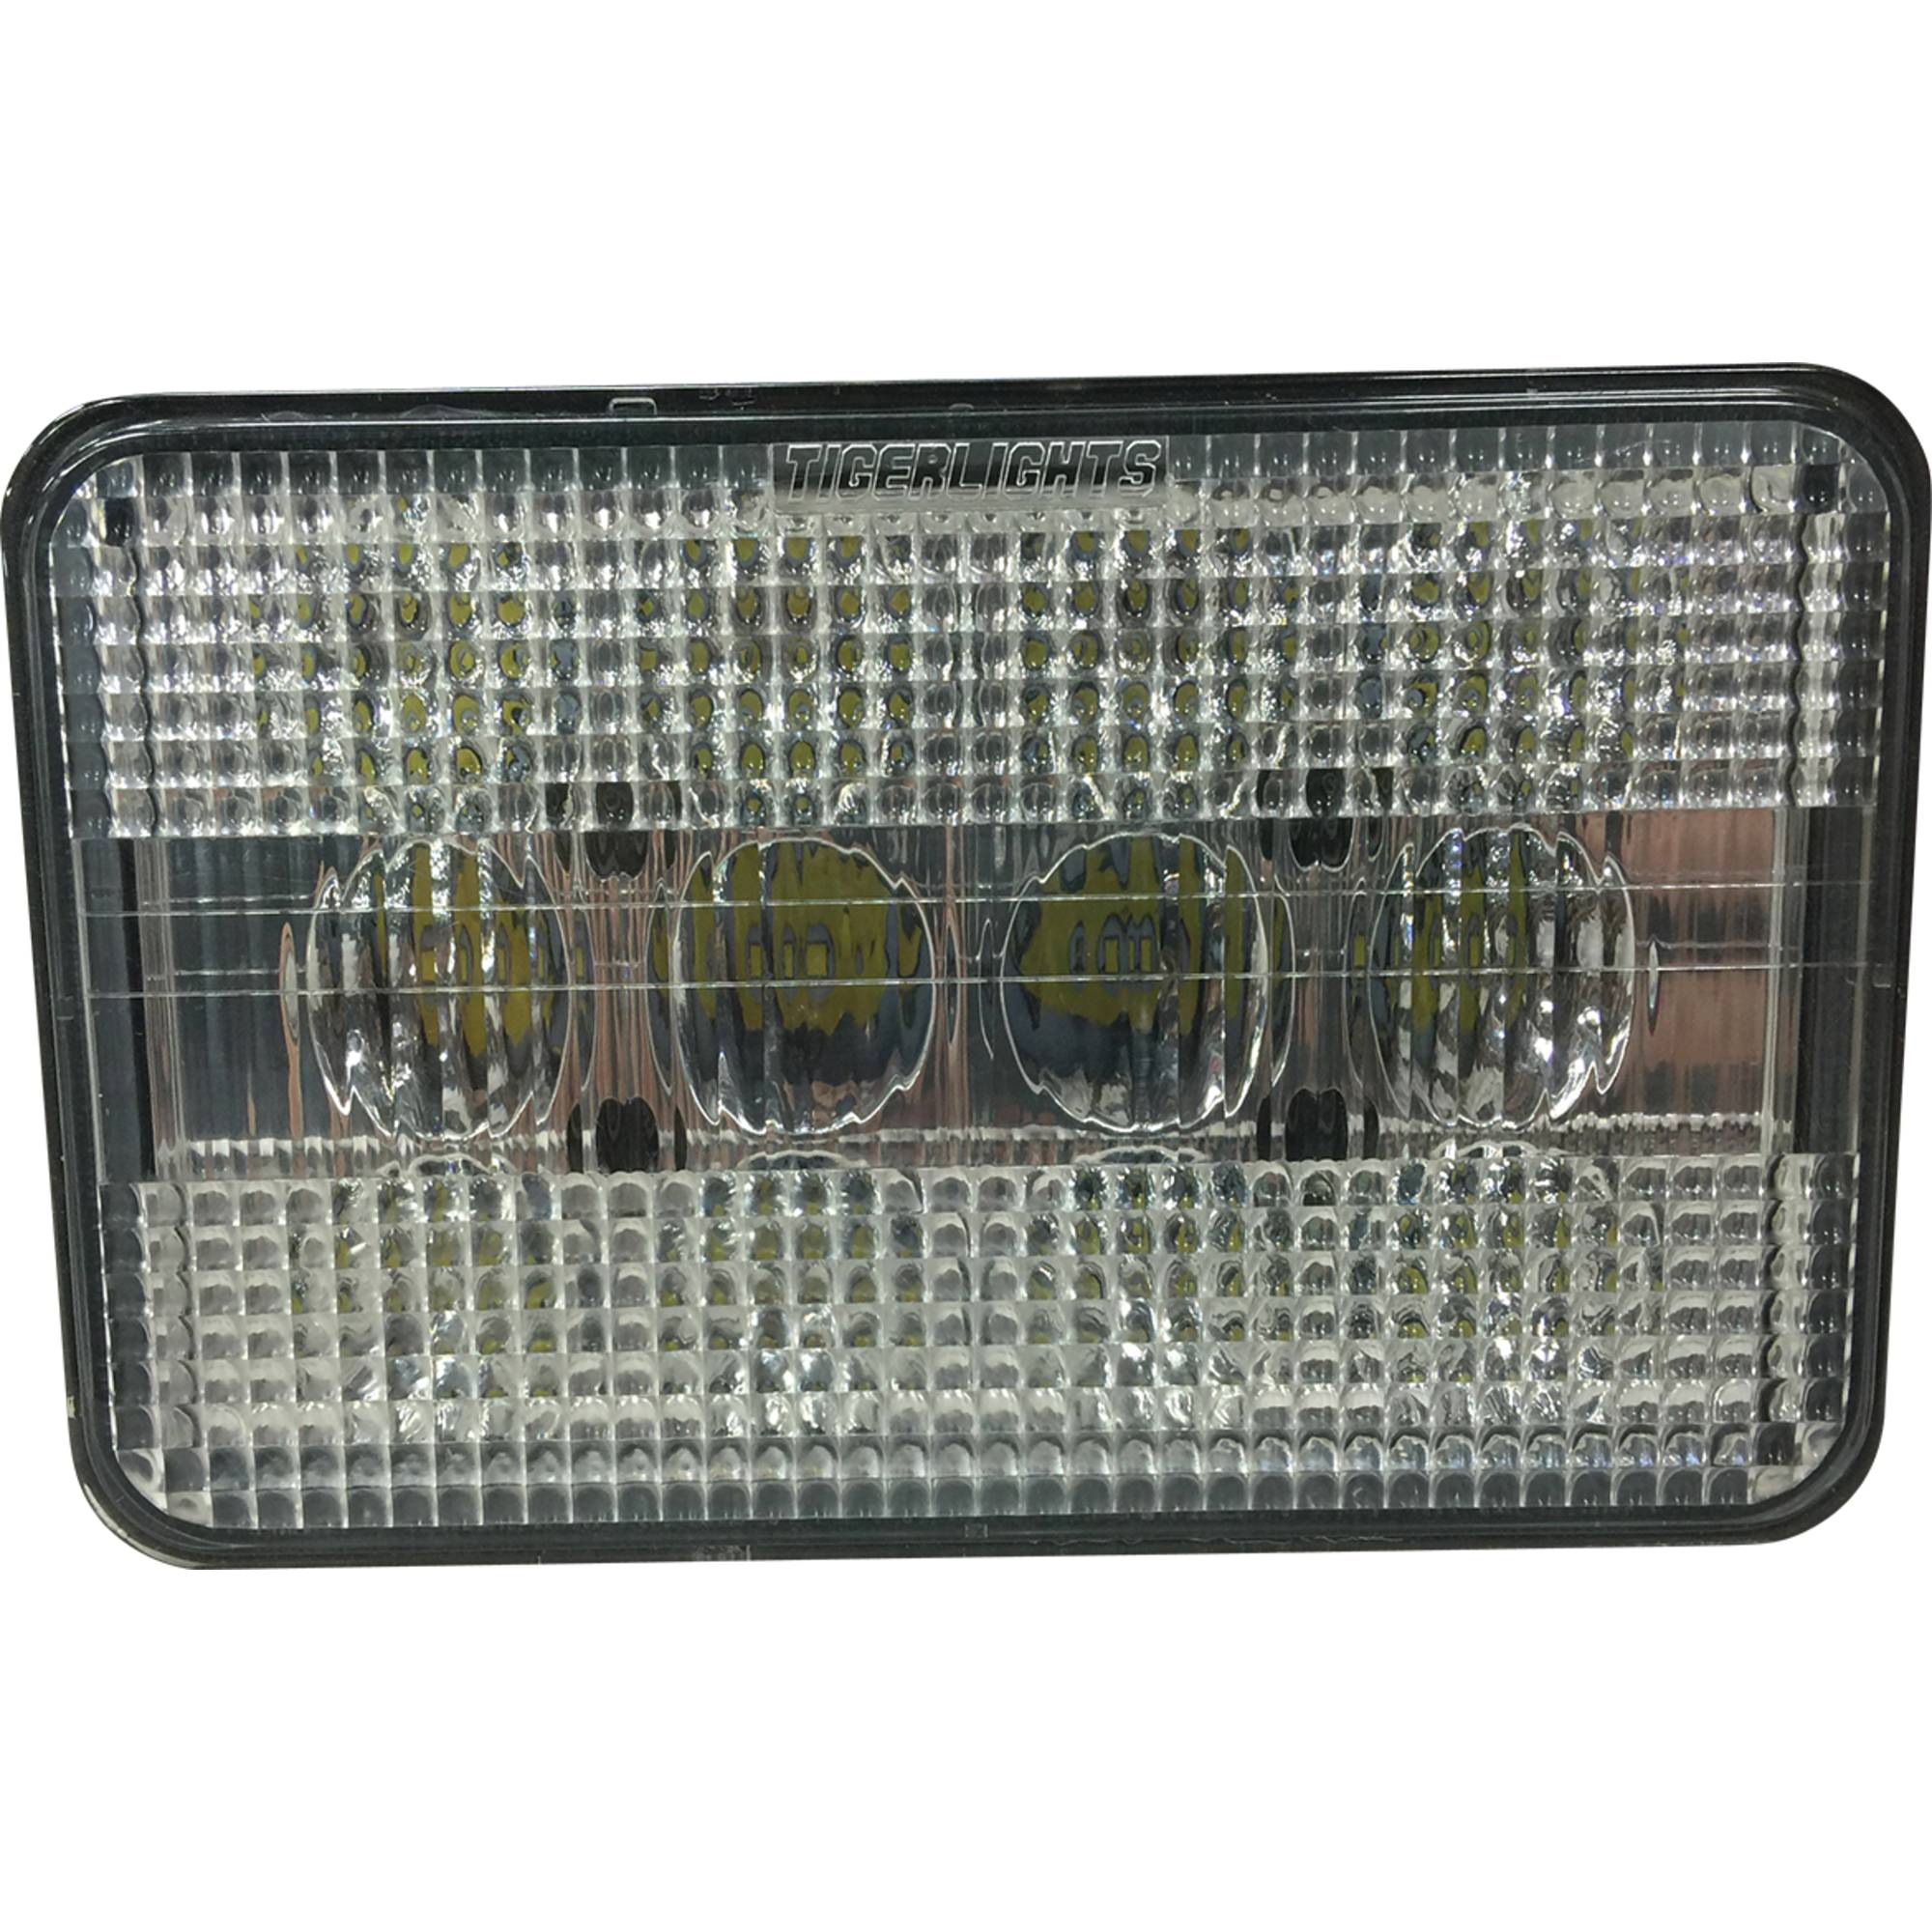 Tiger Lights LED High/Low Beam for Agco 9130, 9150, 9170, 100 Workhorse 72162190; TL9020